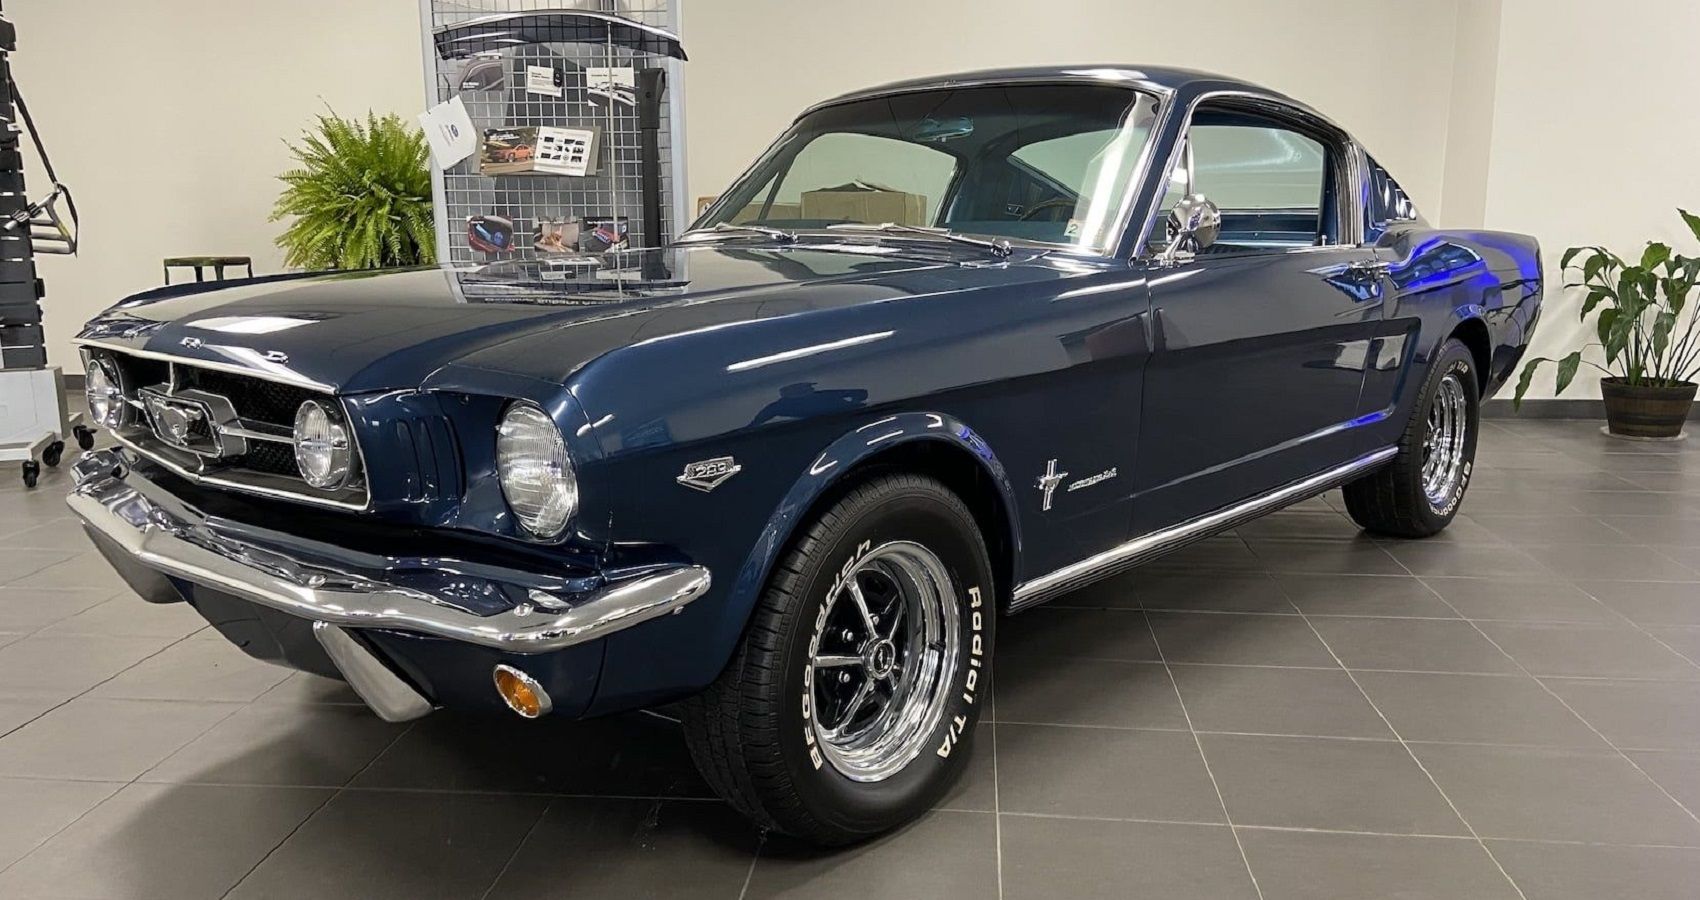 How Much is a 1965 Ford Mustang Worth